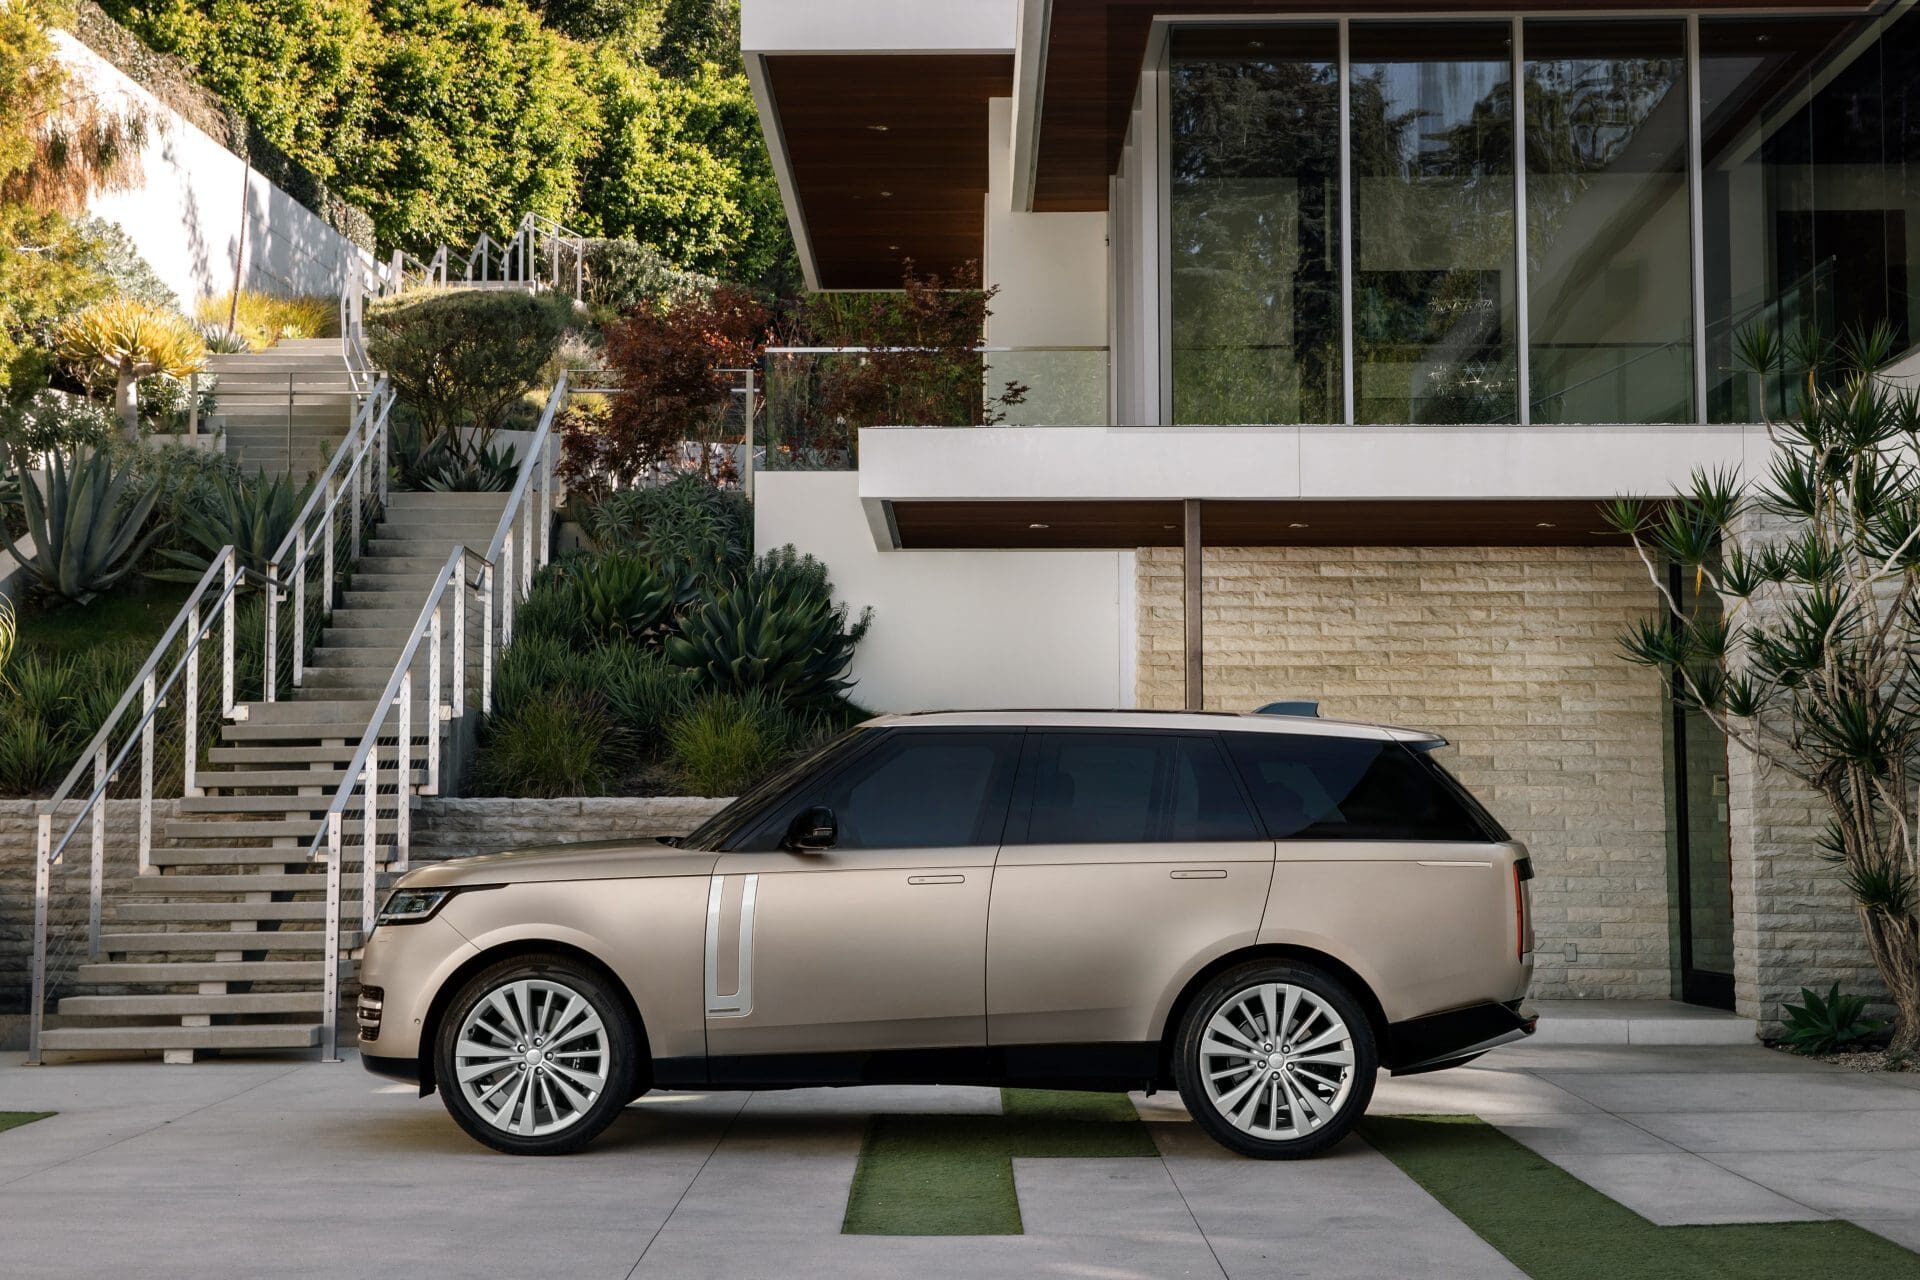 New fifth-generation Land Rover